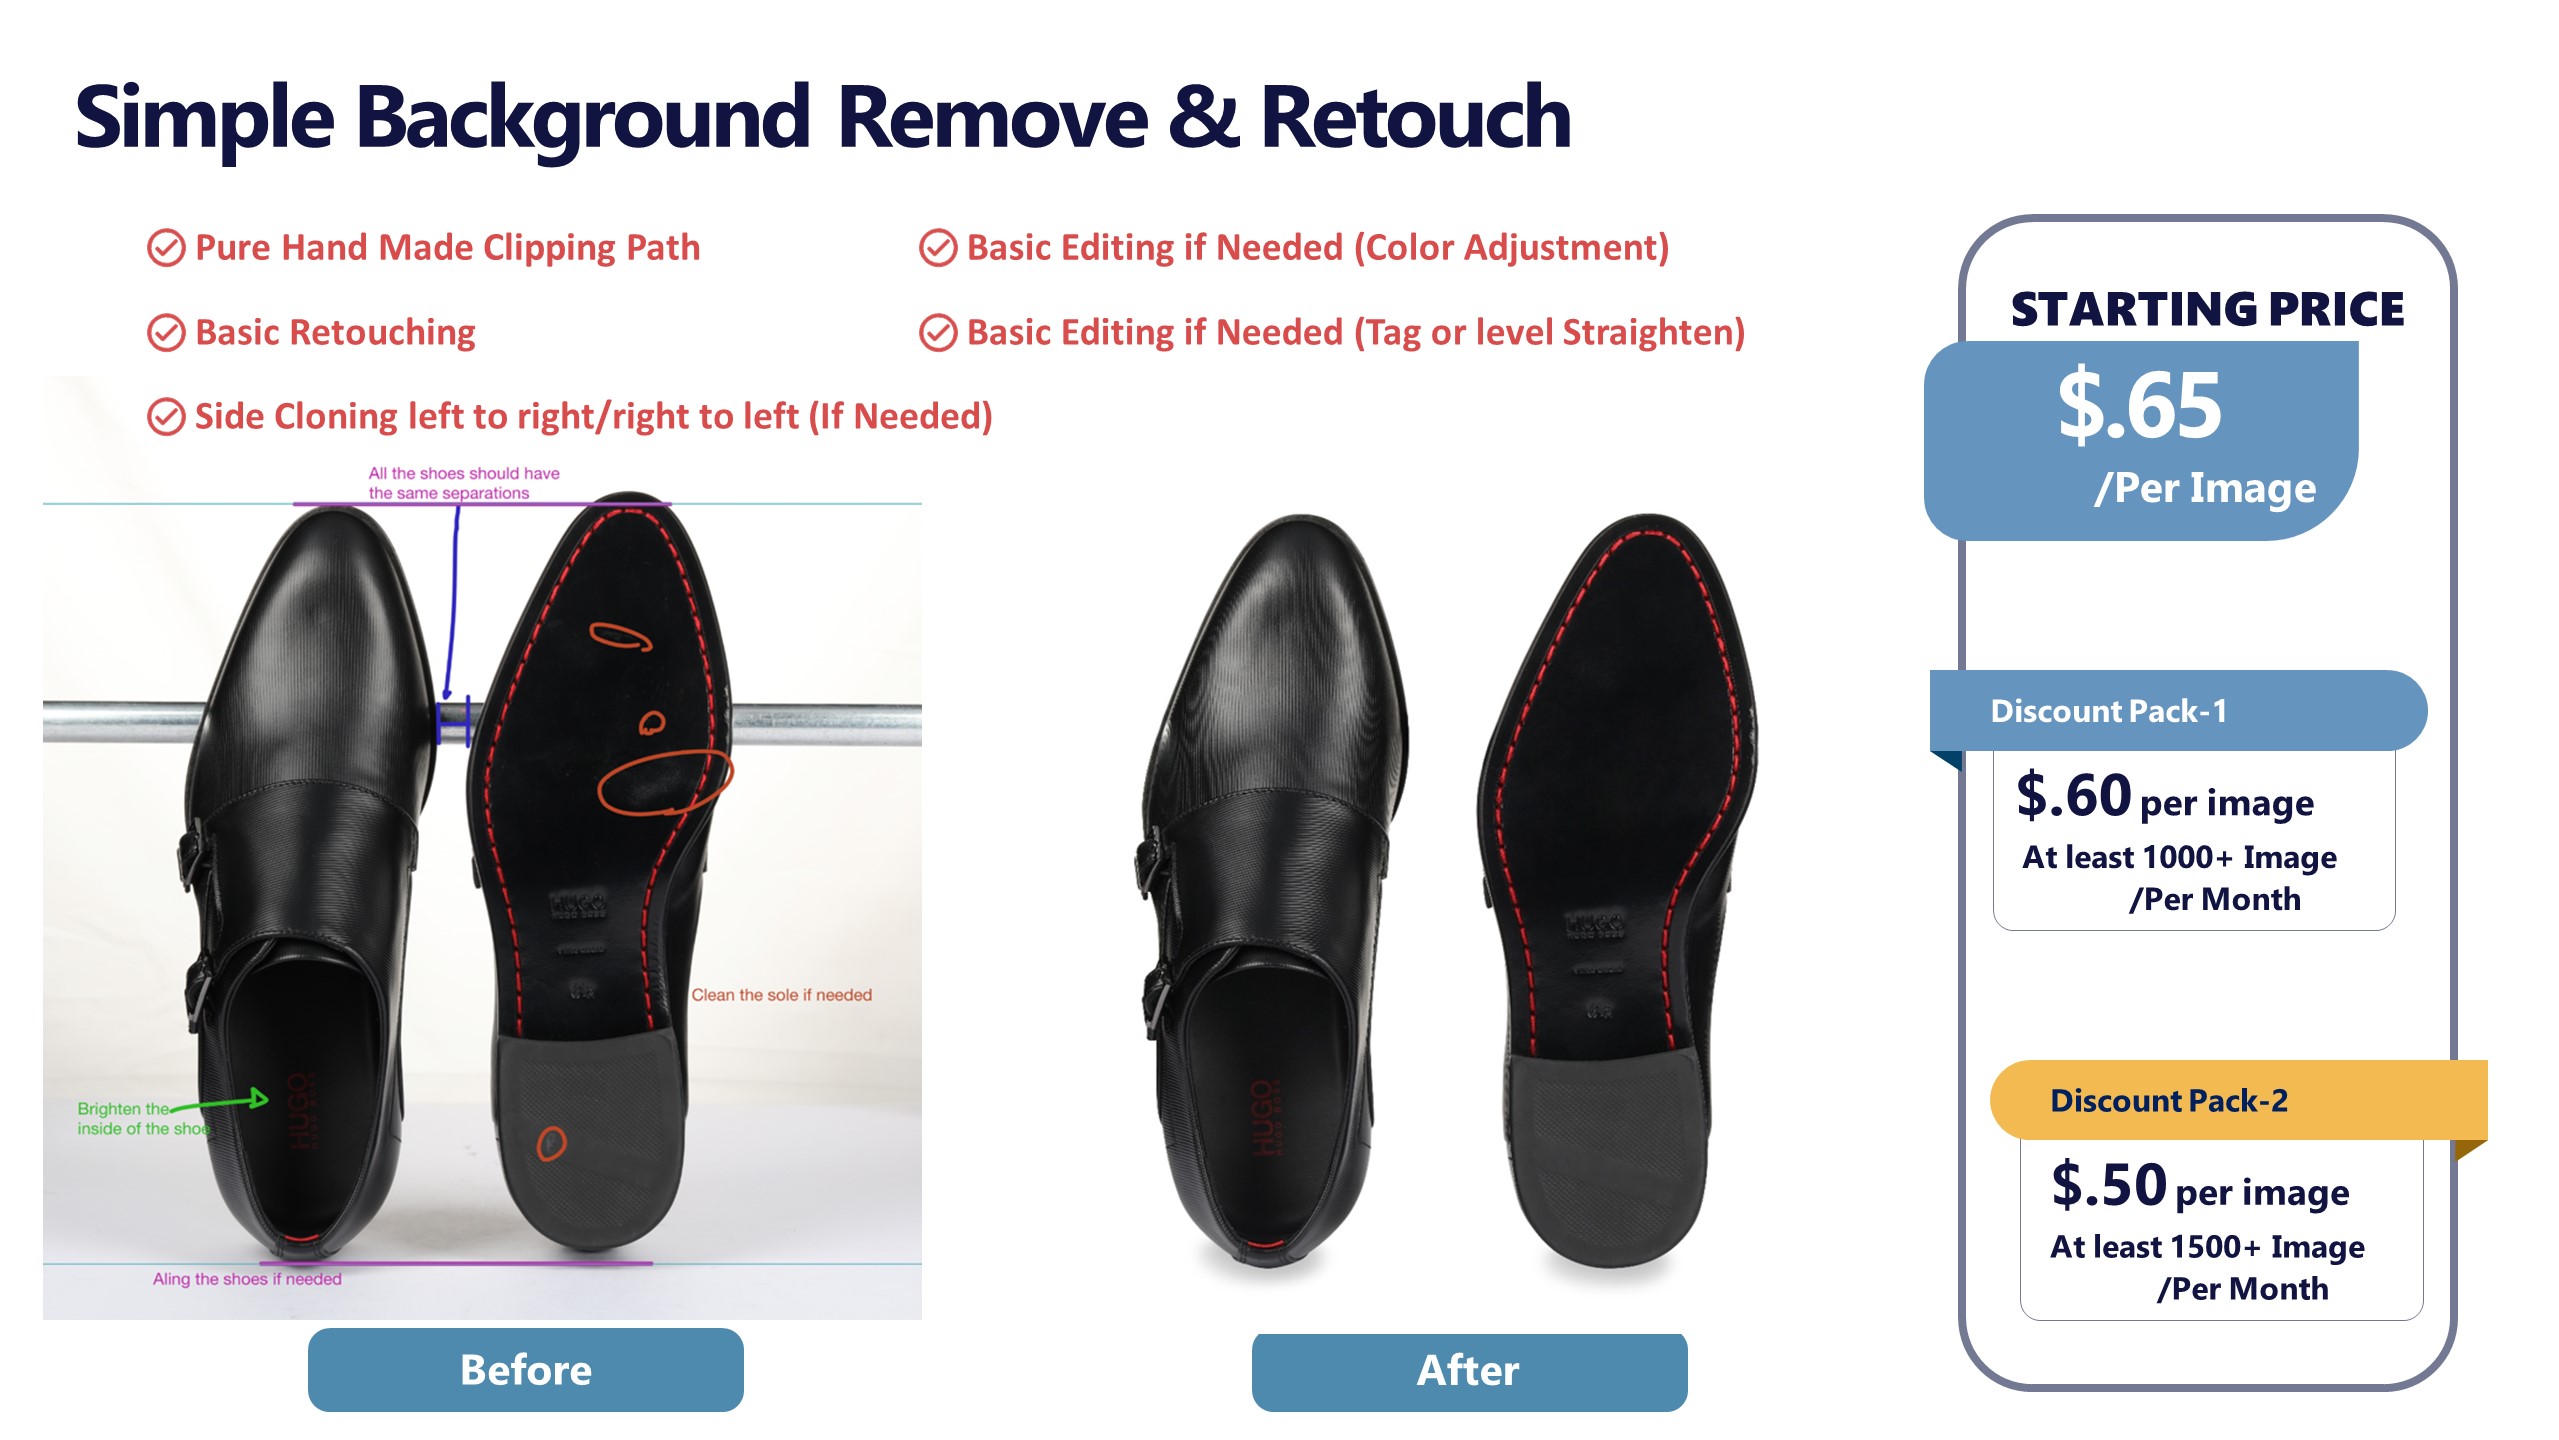 Simple Background Remove & Retouch Dot Clipping